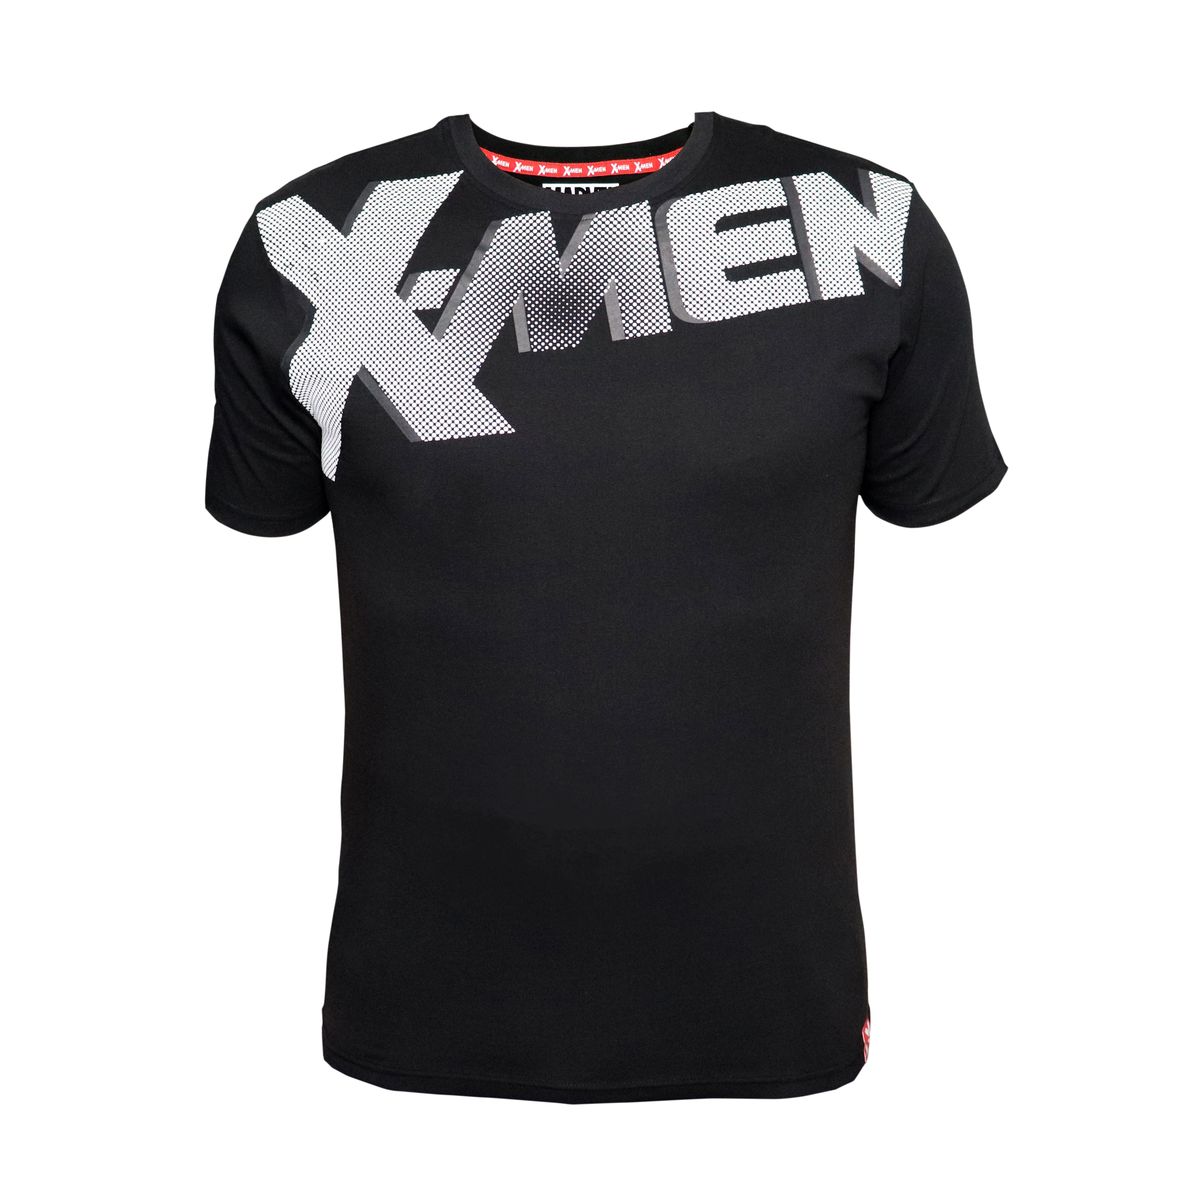 arvel X-en Crew Neck Short Sleeve Tee with Dotted HD Print Black